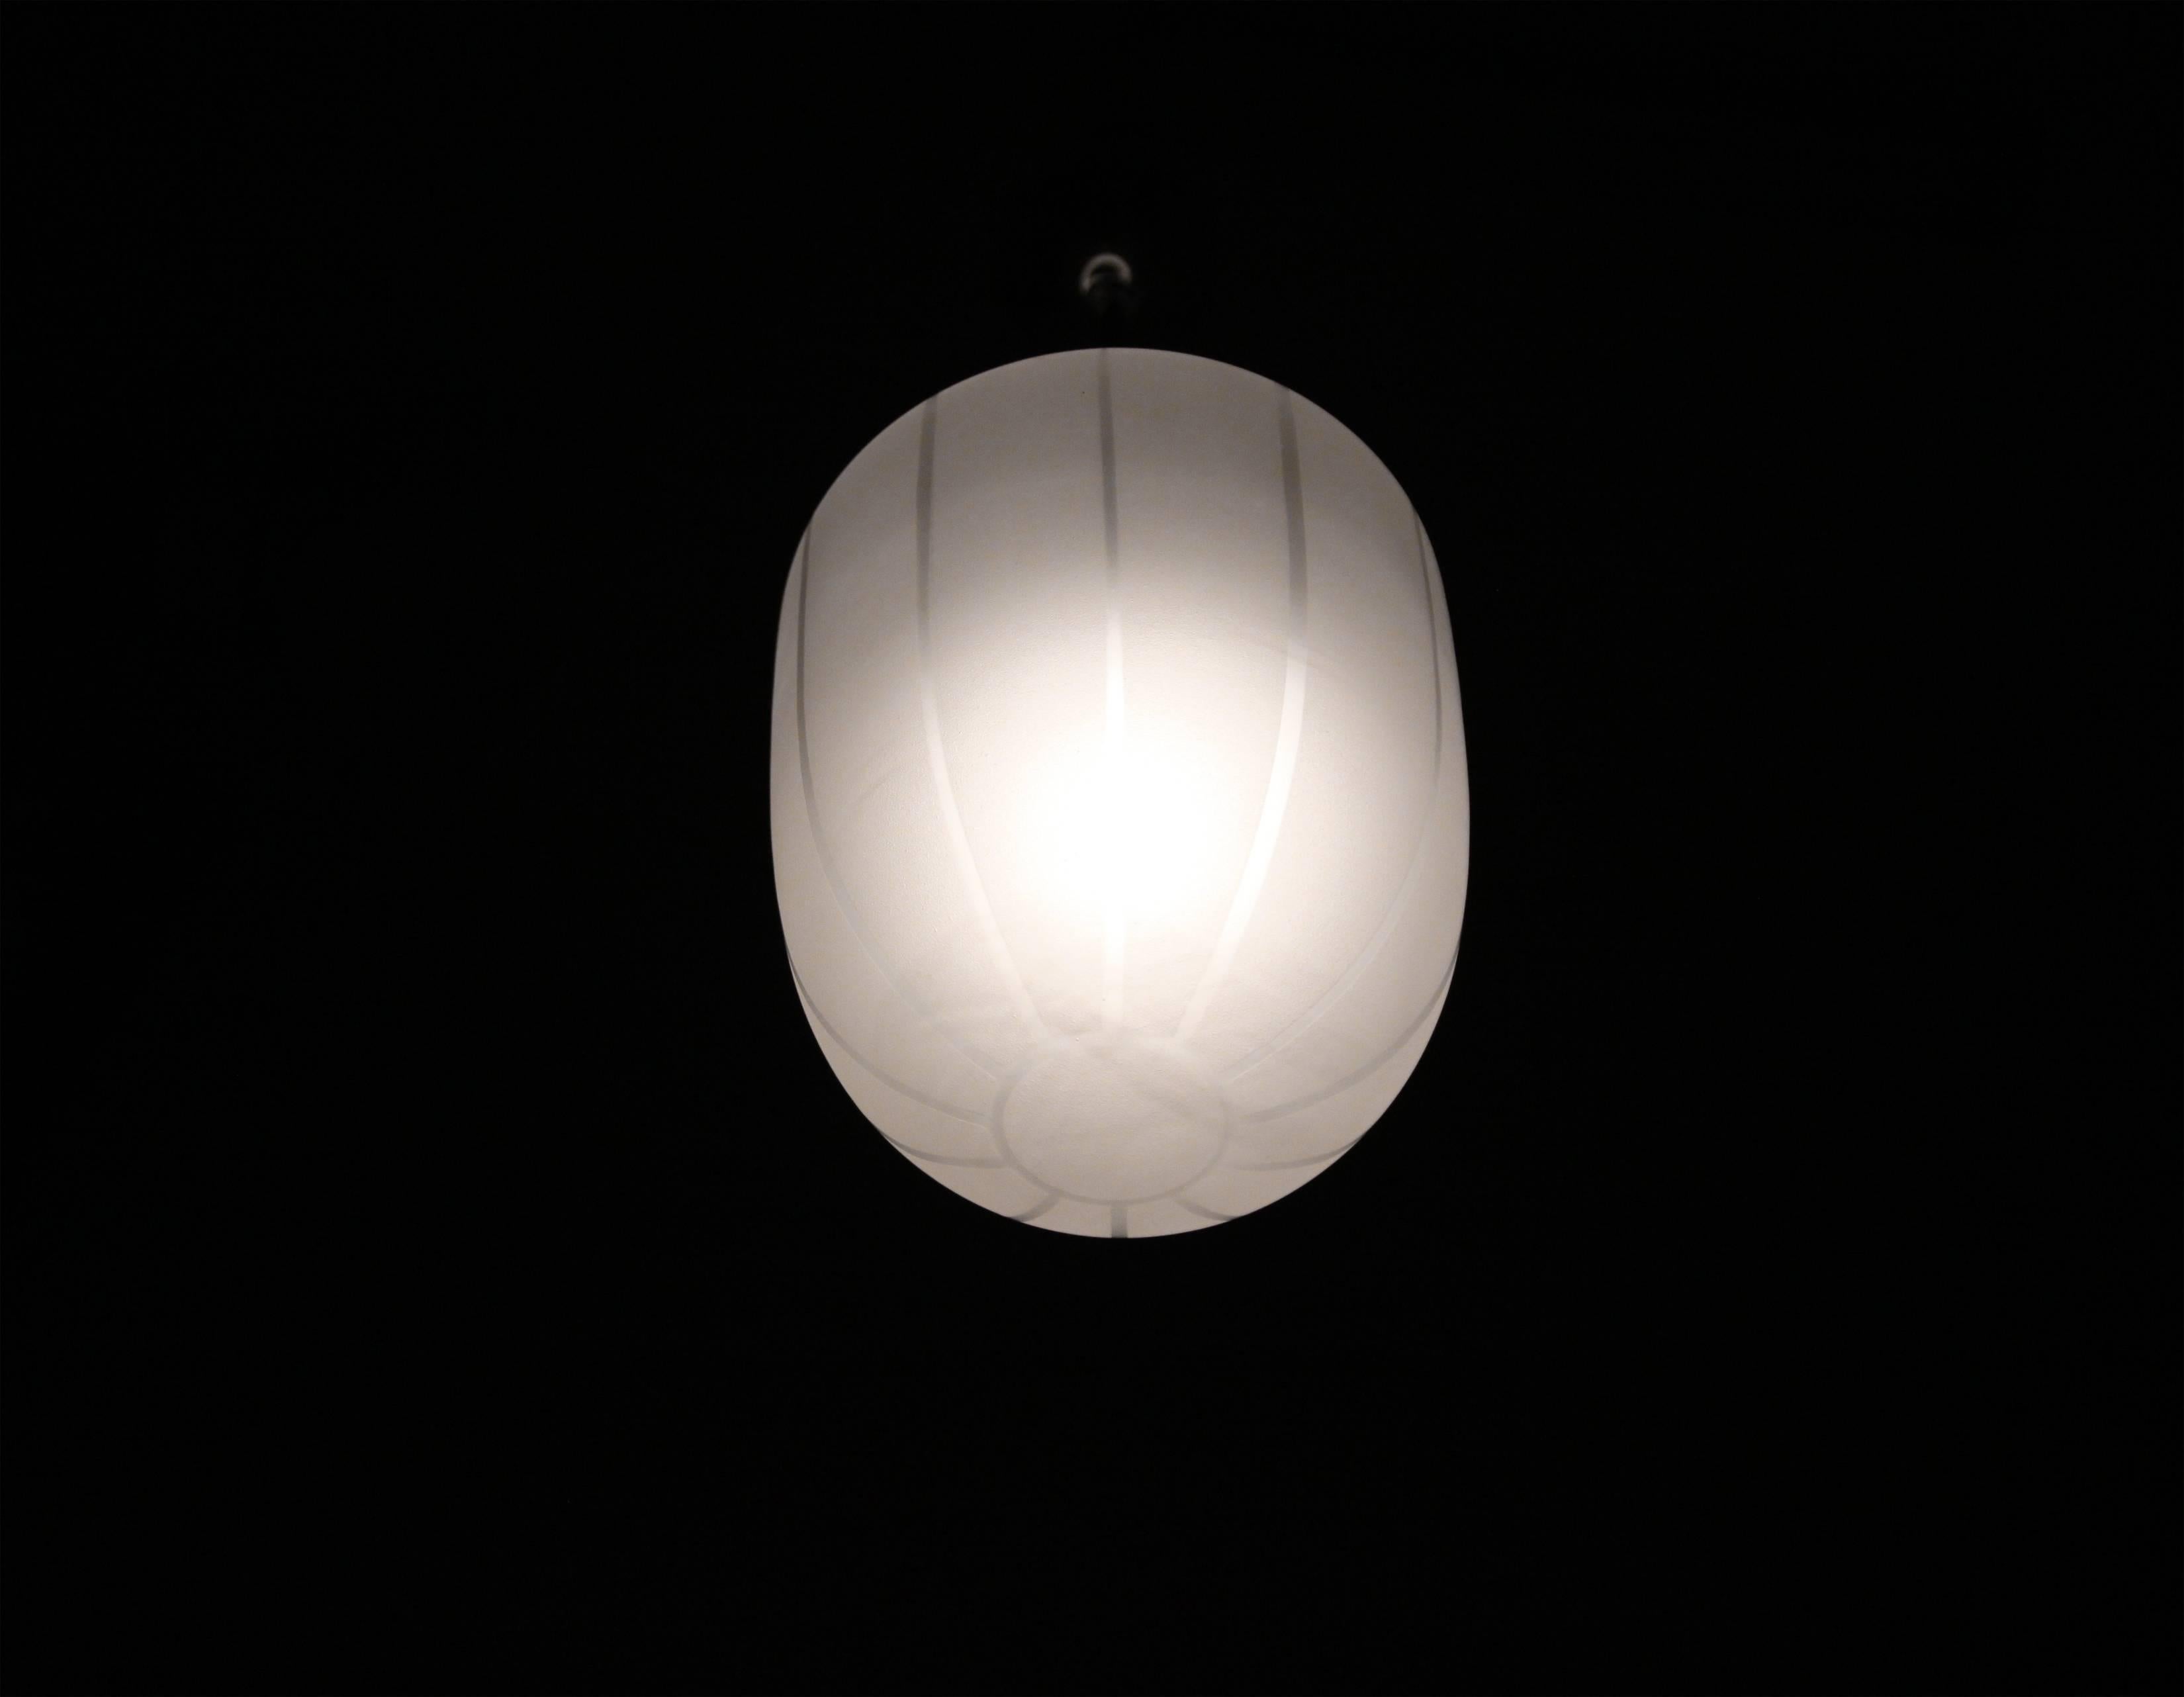 Mid-20th Century Swedish Functionalist Ceiling Light, 1950s For Sale